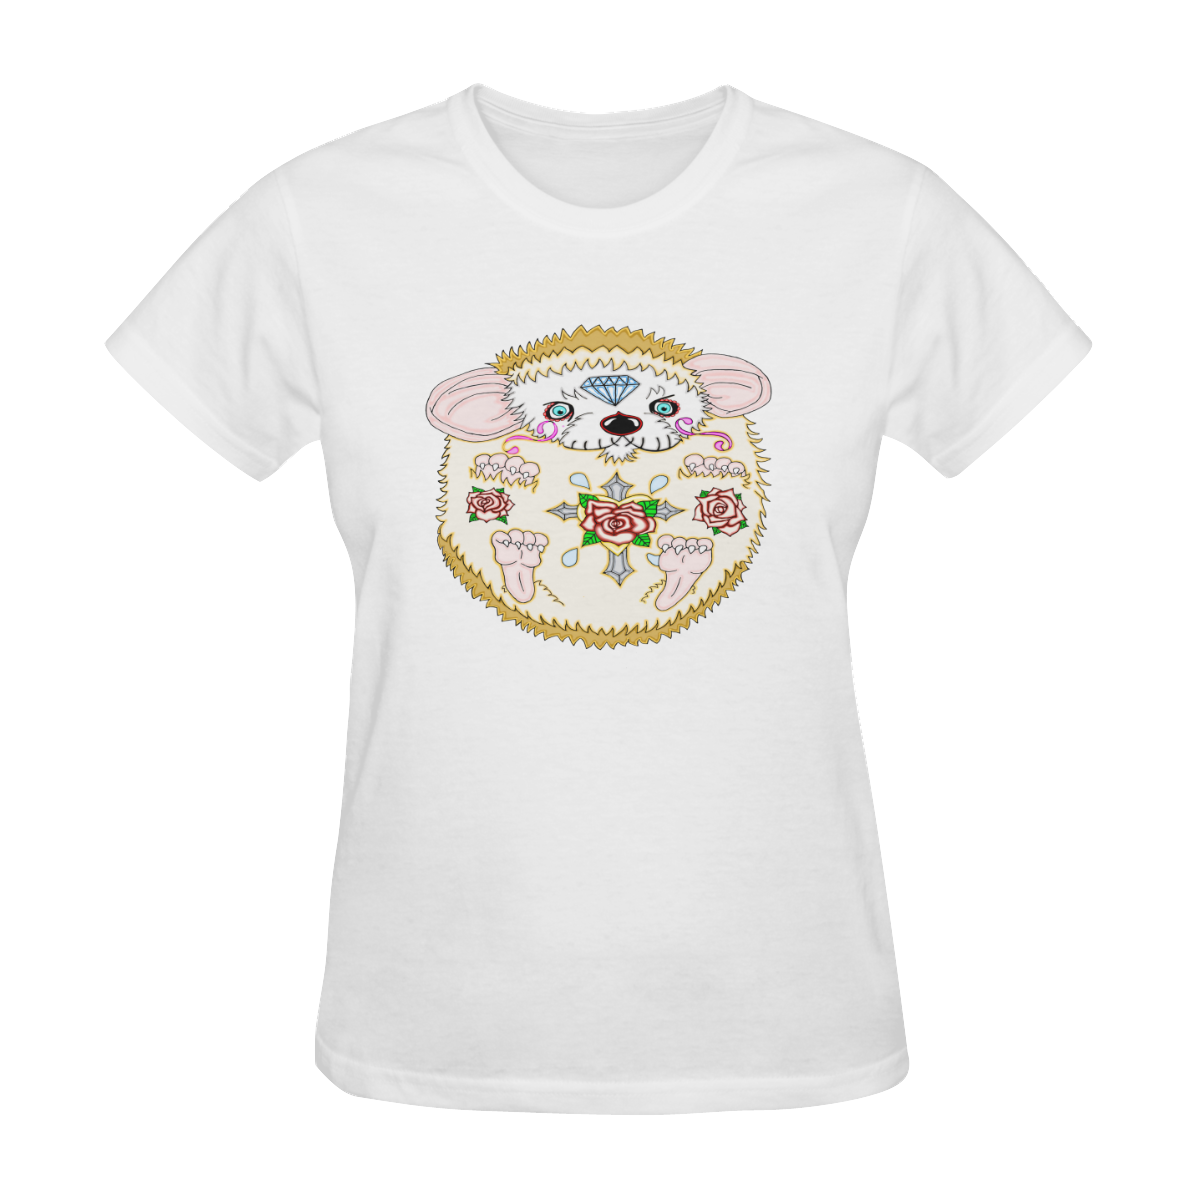 Sugar Skull Hedgehog White Women's T-Shirt in USA Size (Two Sides Printing)